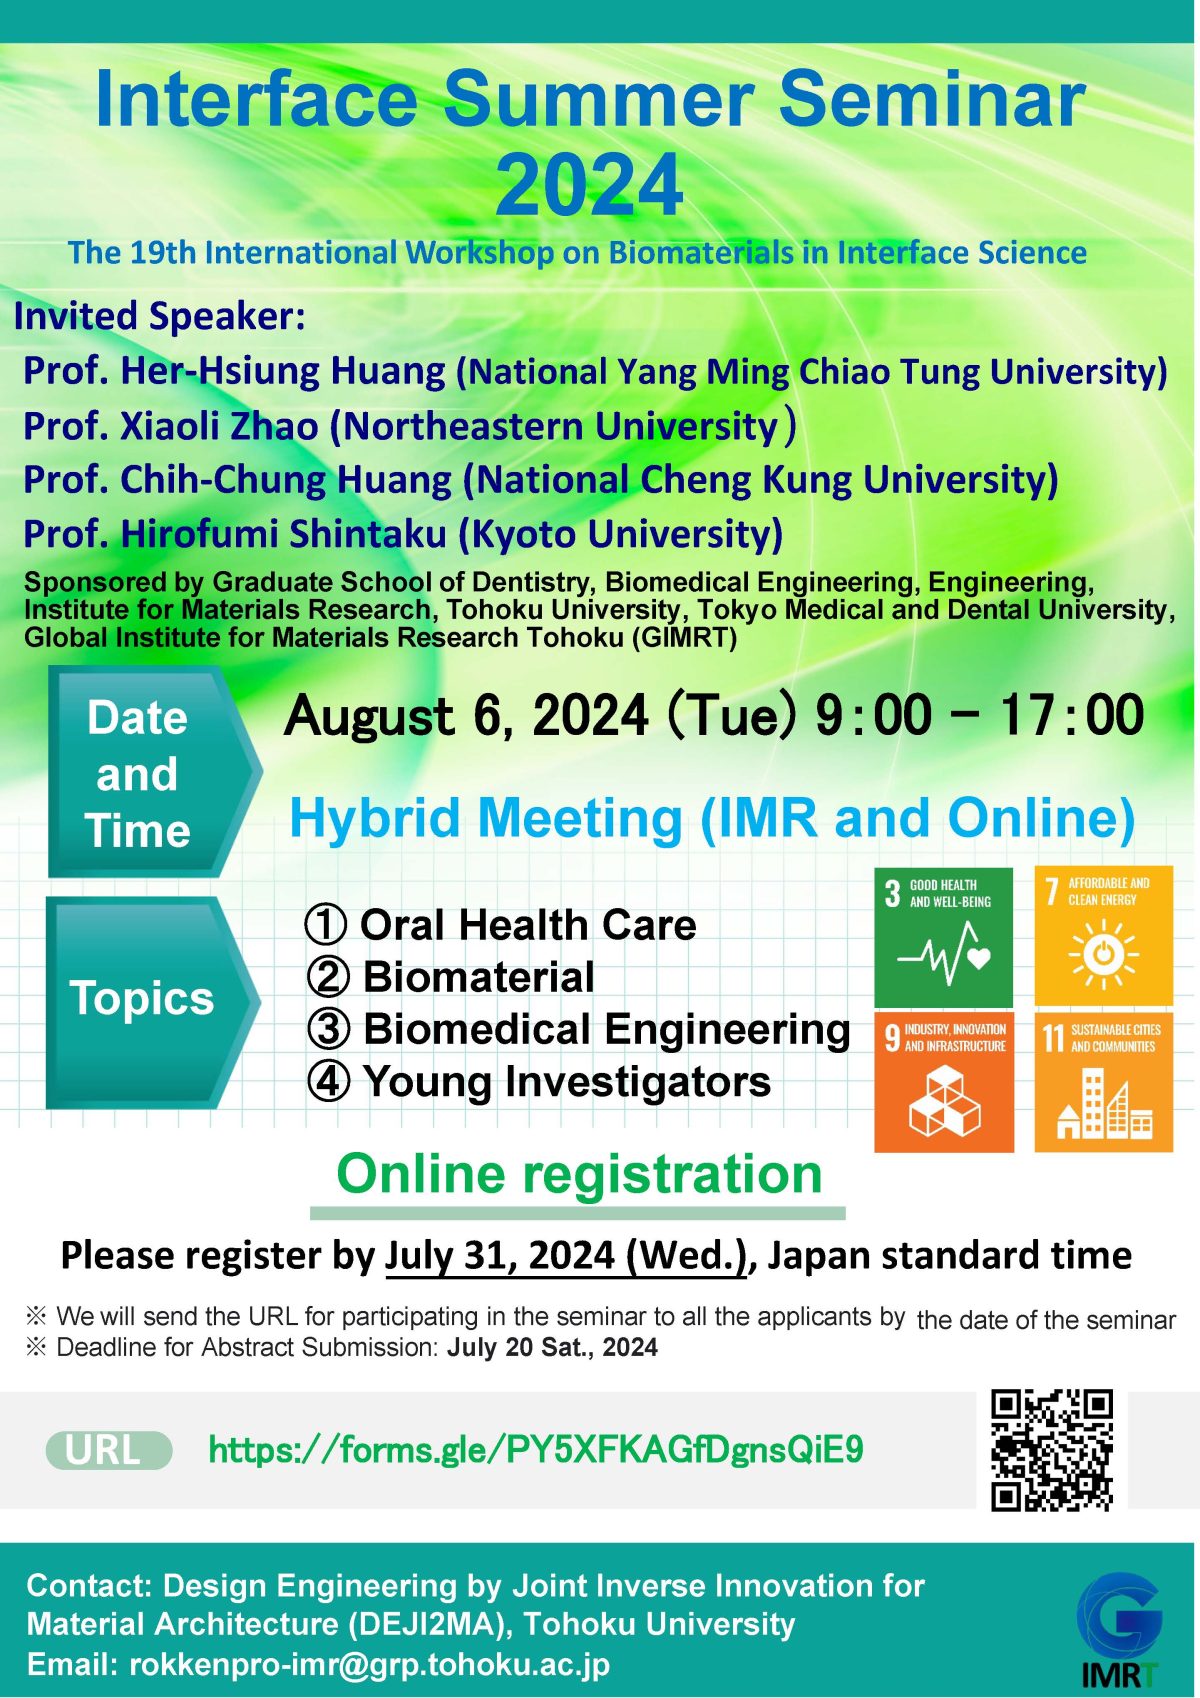 “Interface Summer Seminar 2024”(The 19th International Workshop on Biomaterials in Interface Science) on August 6, 2024